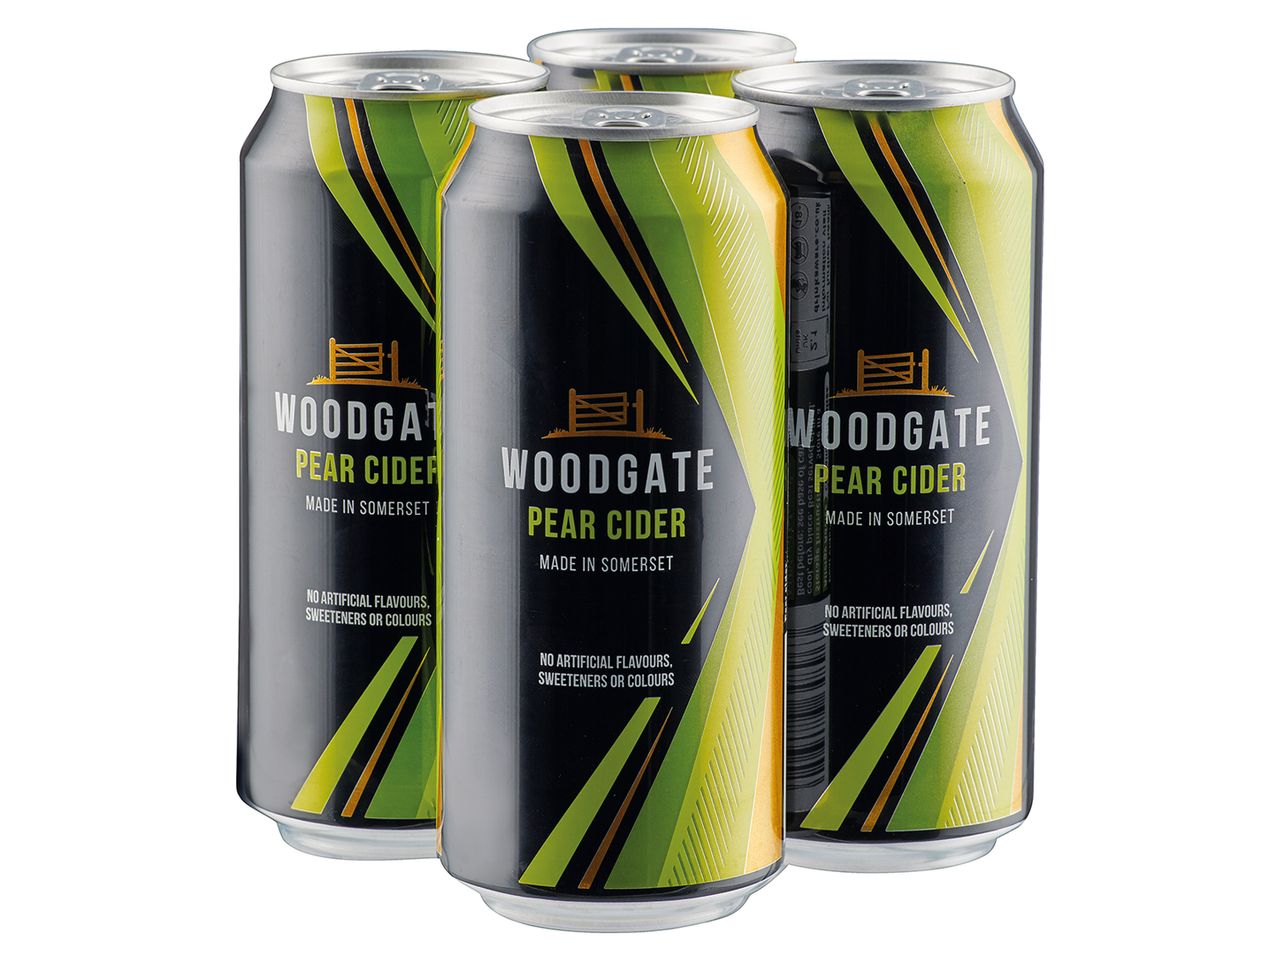 Go to full screen view: Woodgate Pear Cider - Image 1